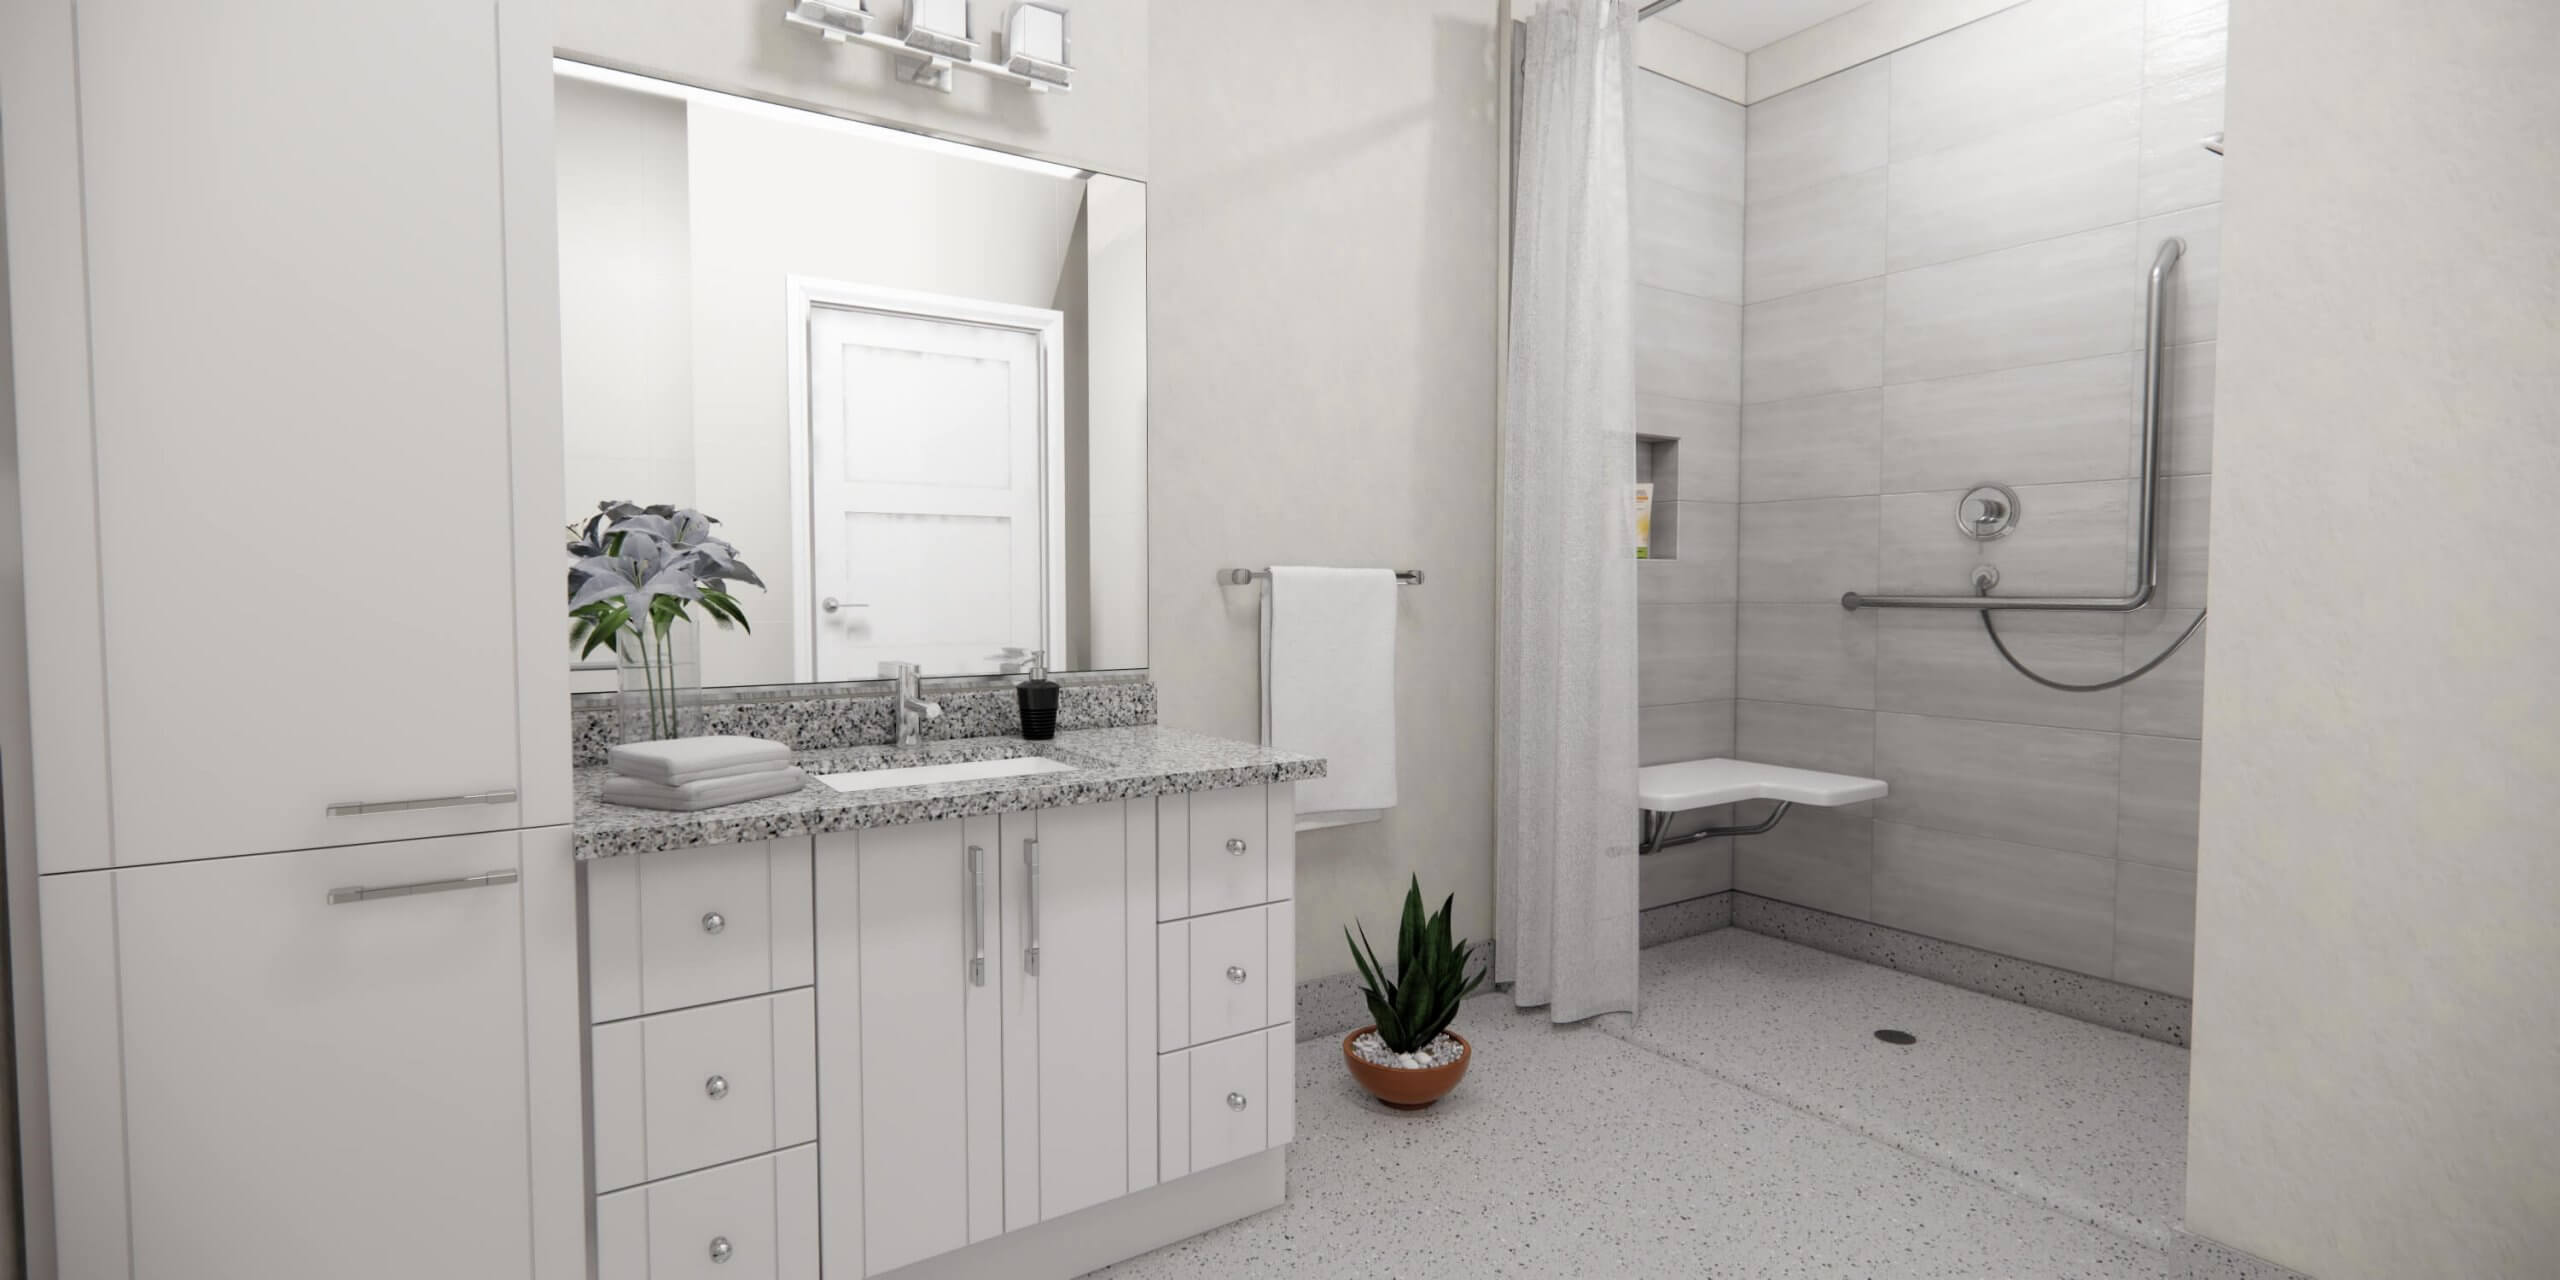 Bright, white bathroom with walk-in shower